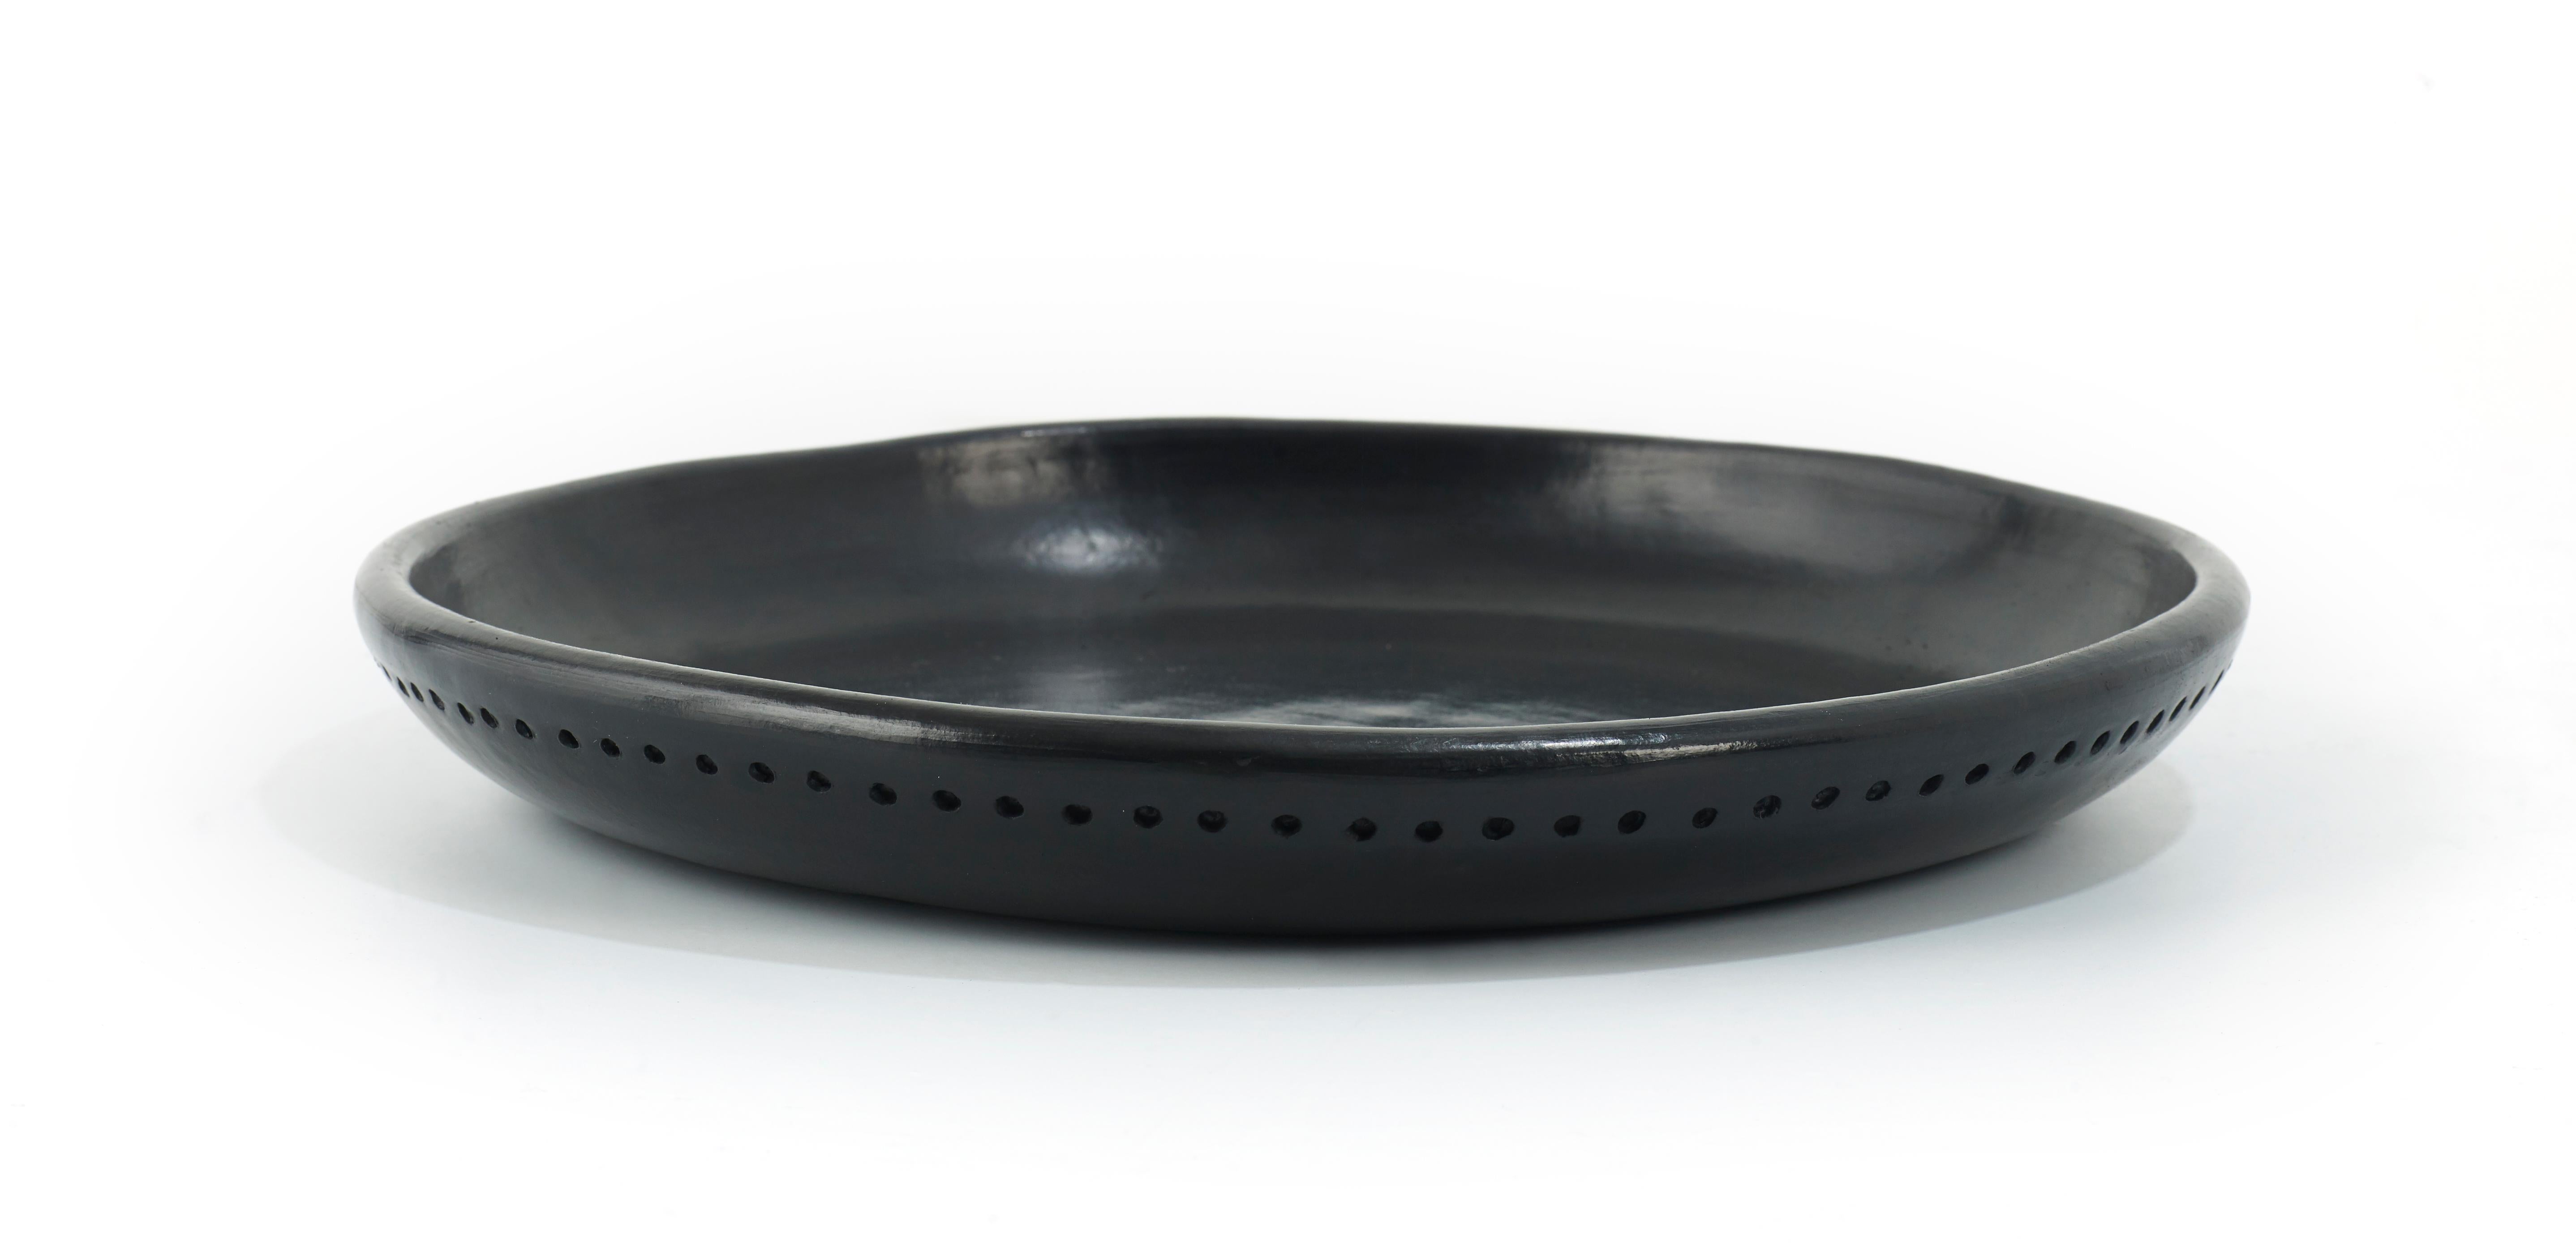 Plate 5 Bowl Barro dining by Sebastian Herkner
Materials: Heat-resistant Black ceramic. 
Technique: Glazed. Oven cooked and polished with semi-precious stones. 
Dimensions: Diameter 29 cm x H 3 cm 
Available in other sizes.

This plate belongs